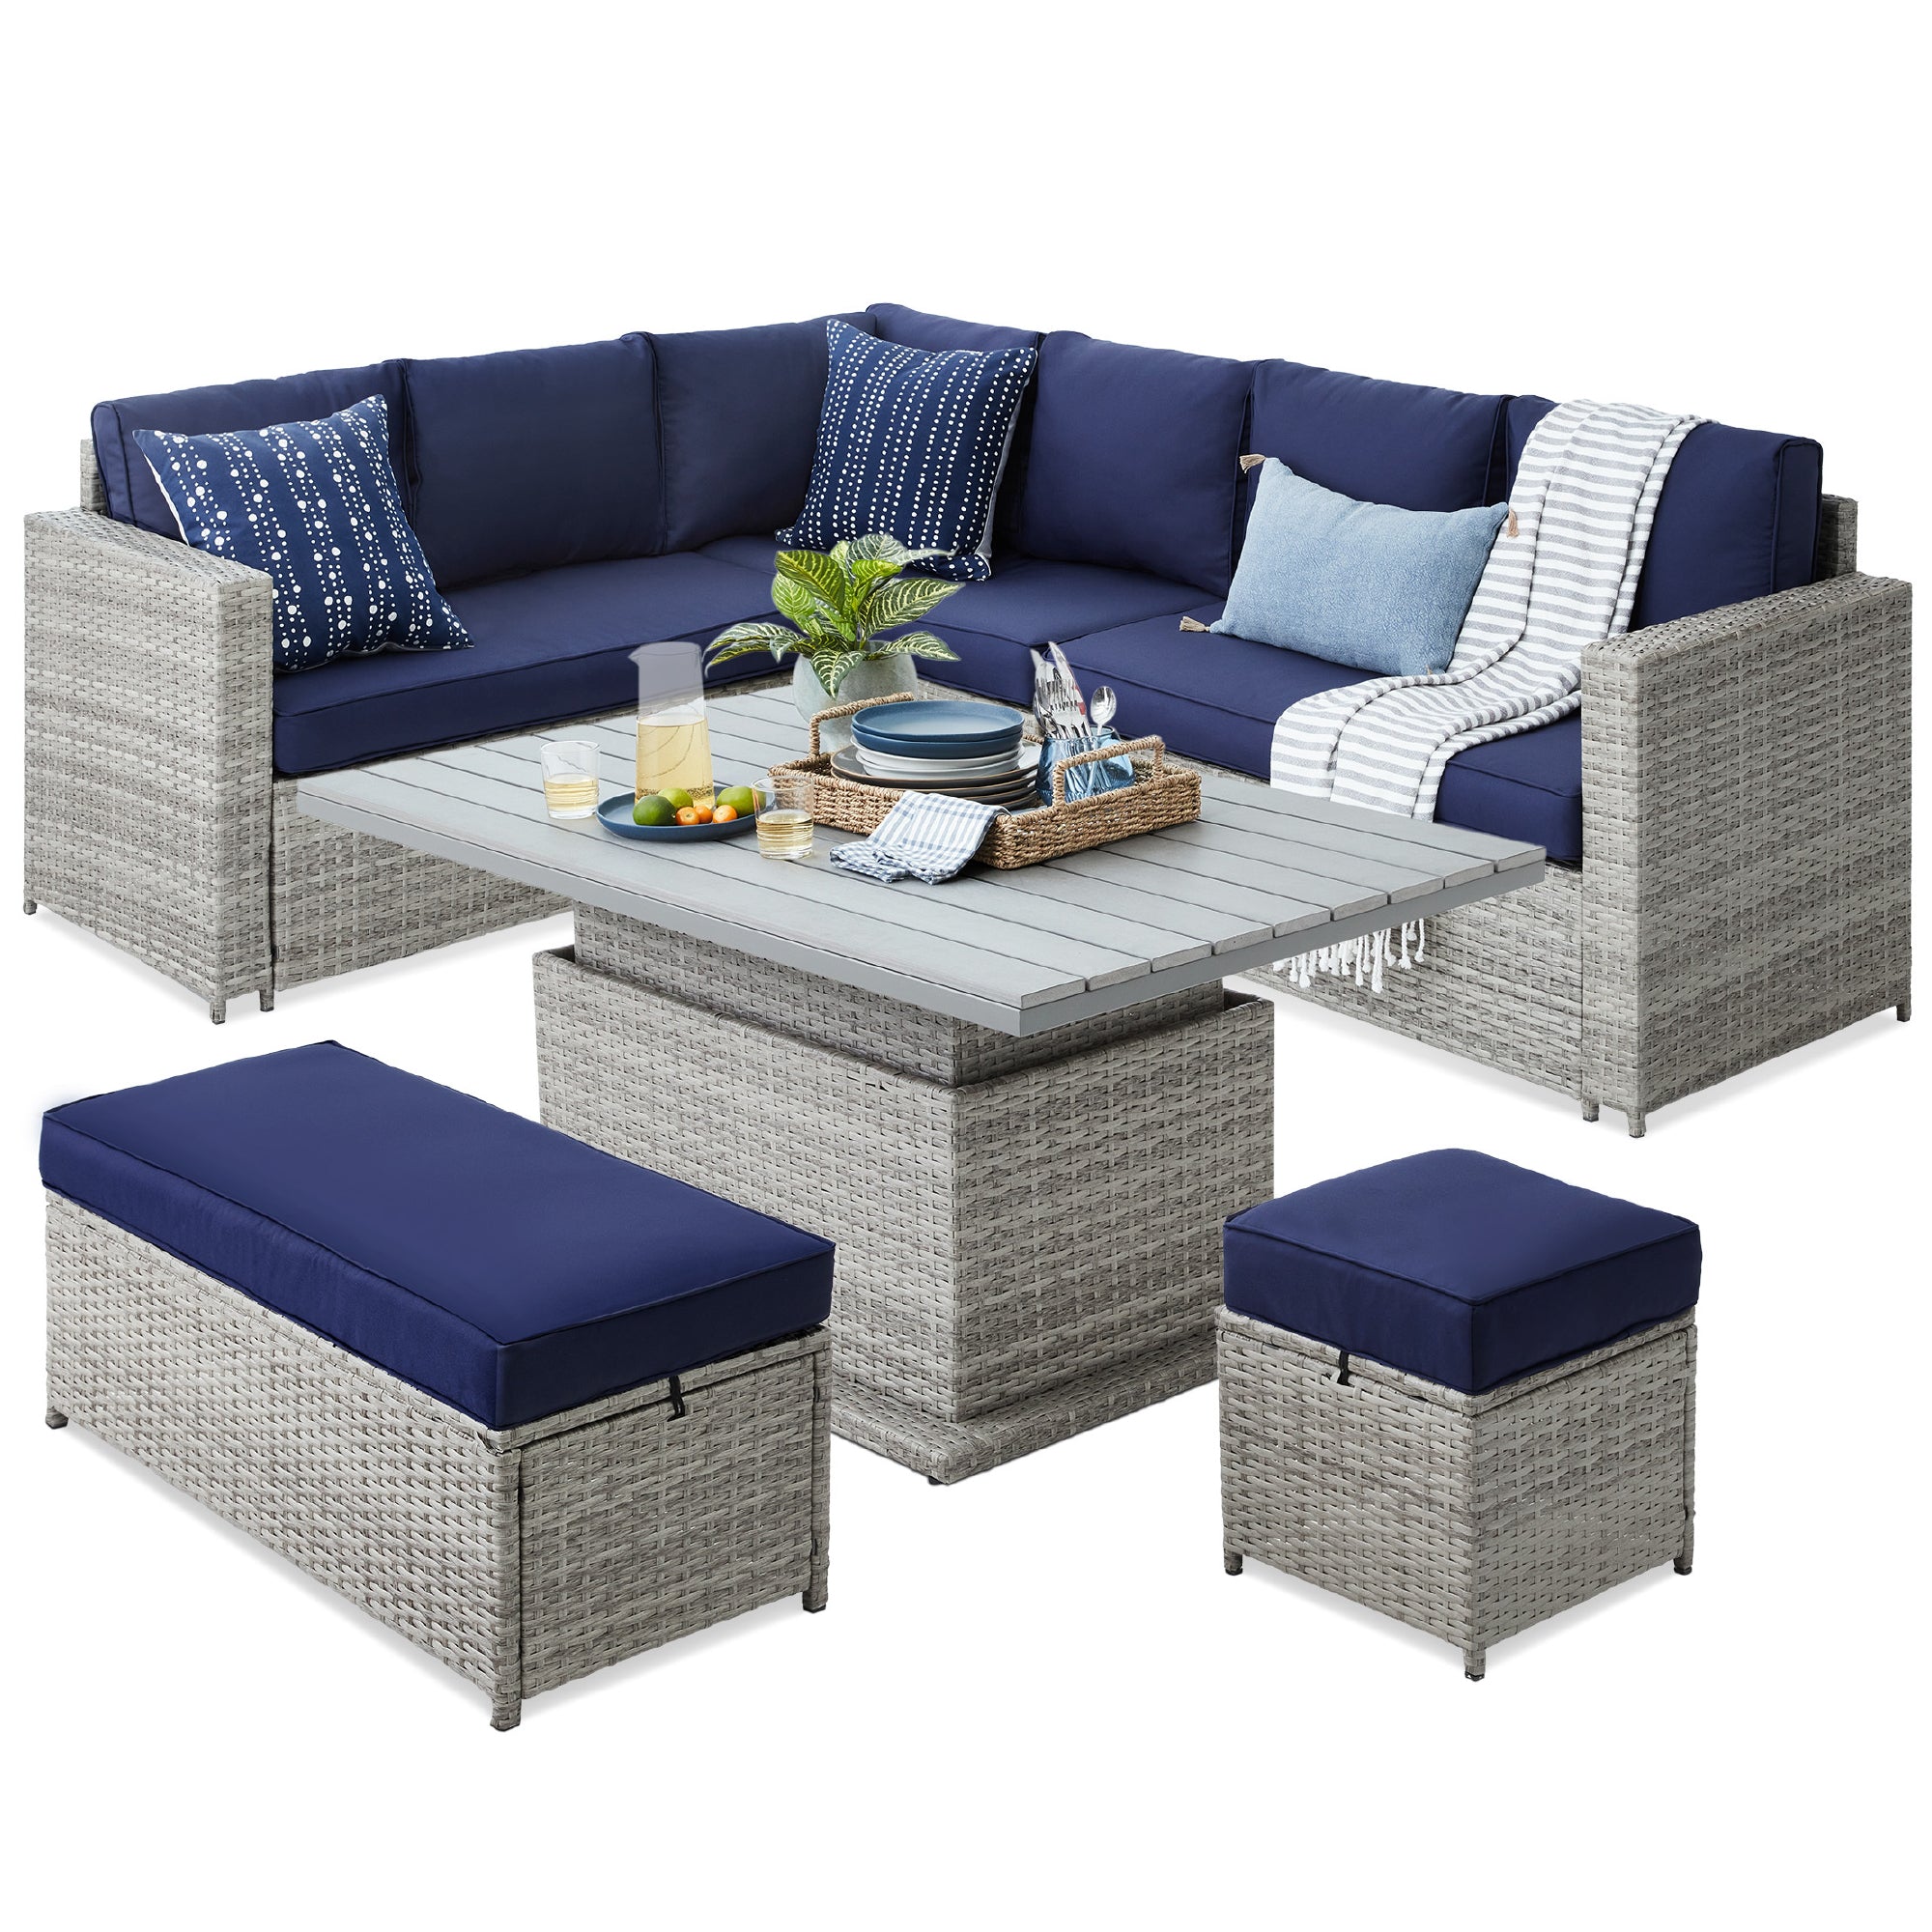 Best Choice Products 6 Piece Wicker Conversation Sofa Set 2 In 1 Outdoor Patio Furniture W Height Adjule Dining Table Weather Resistant